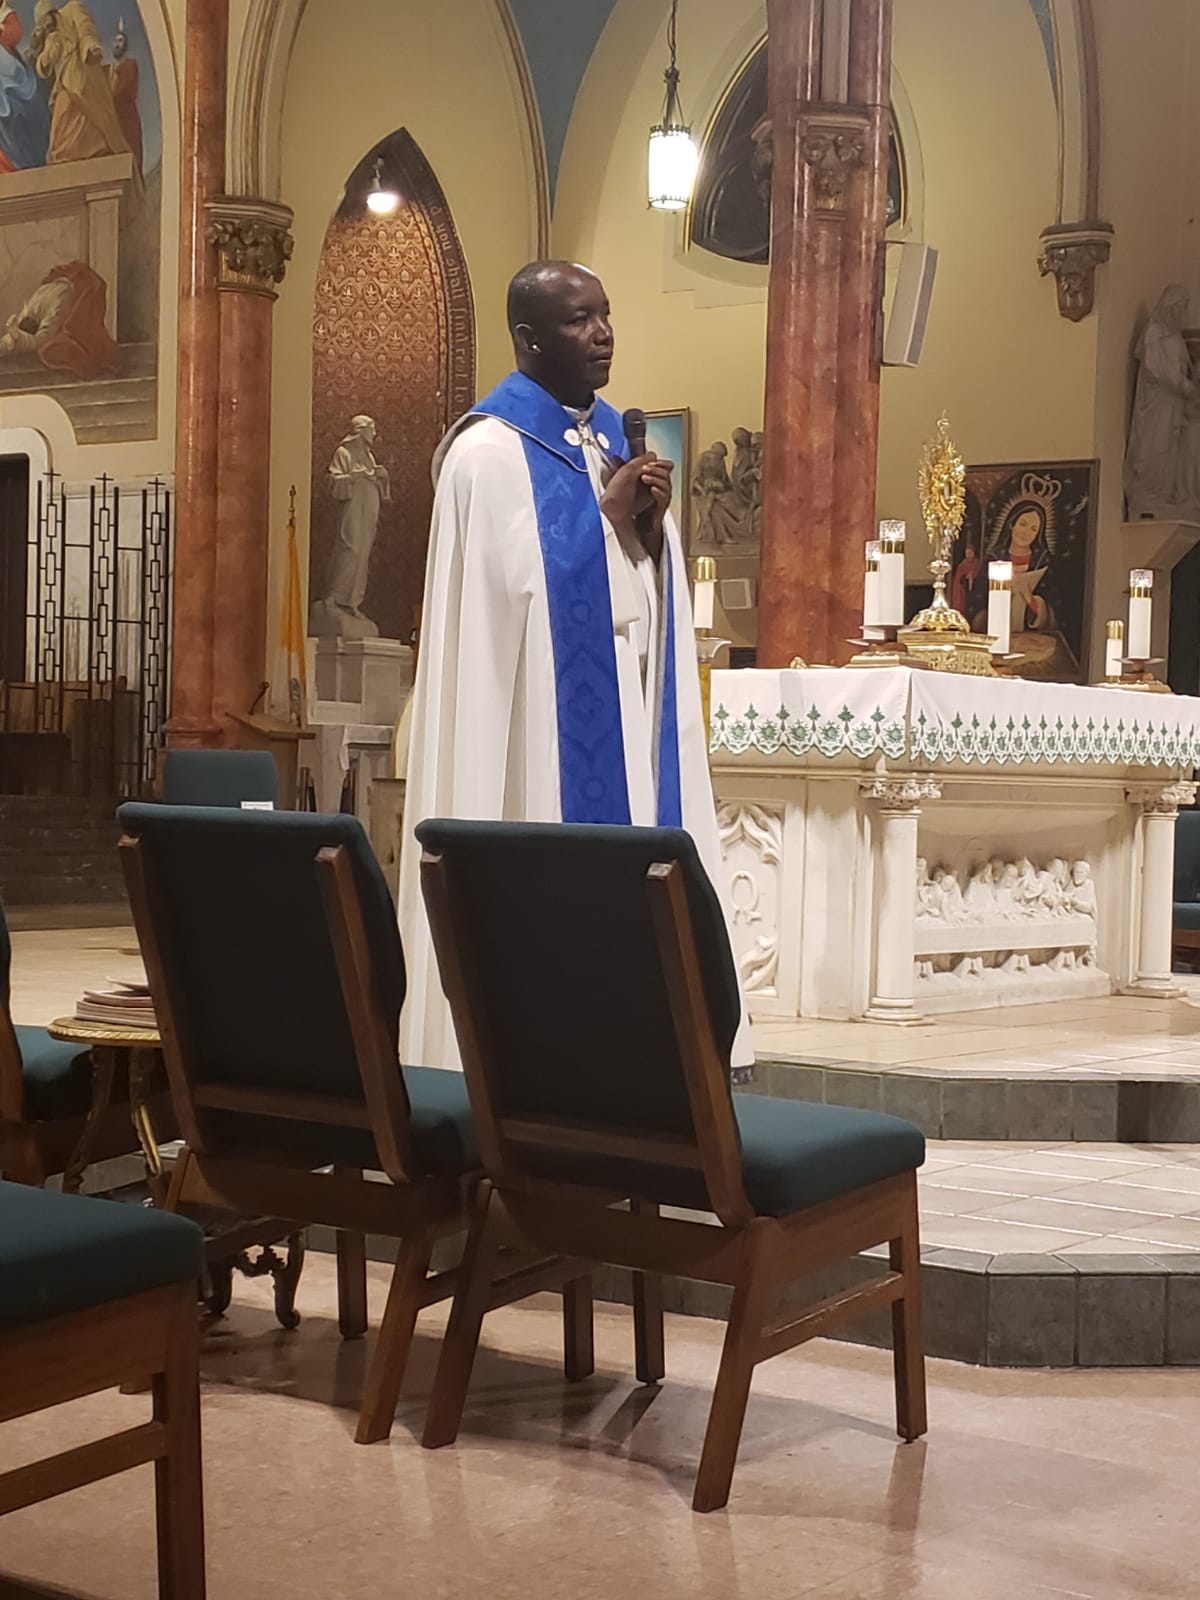 A priest is standing in front of chairs.